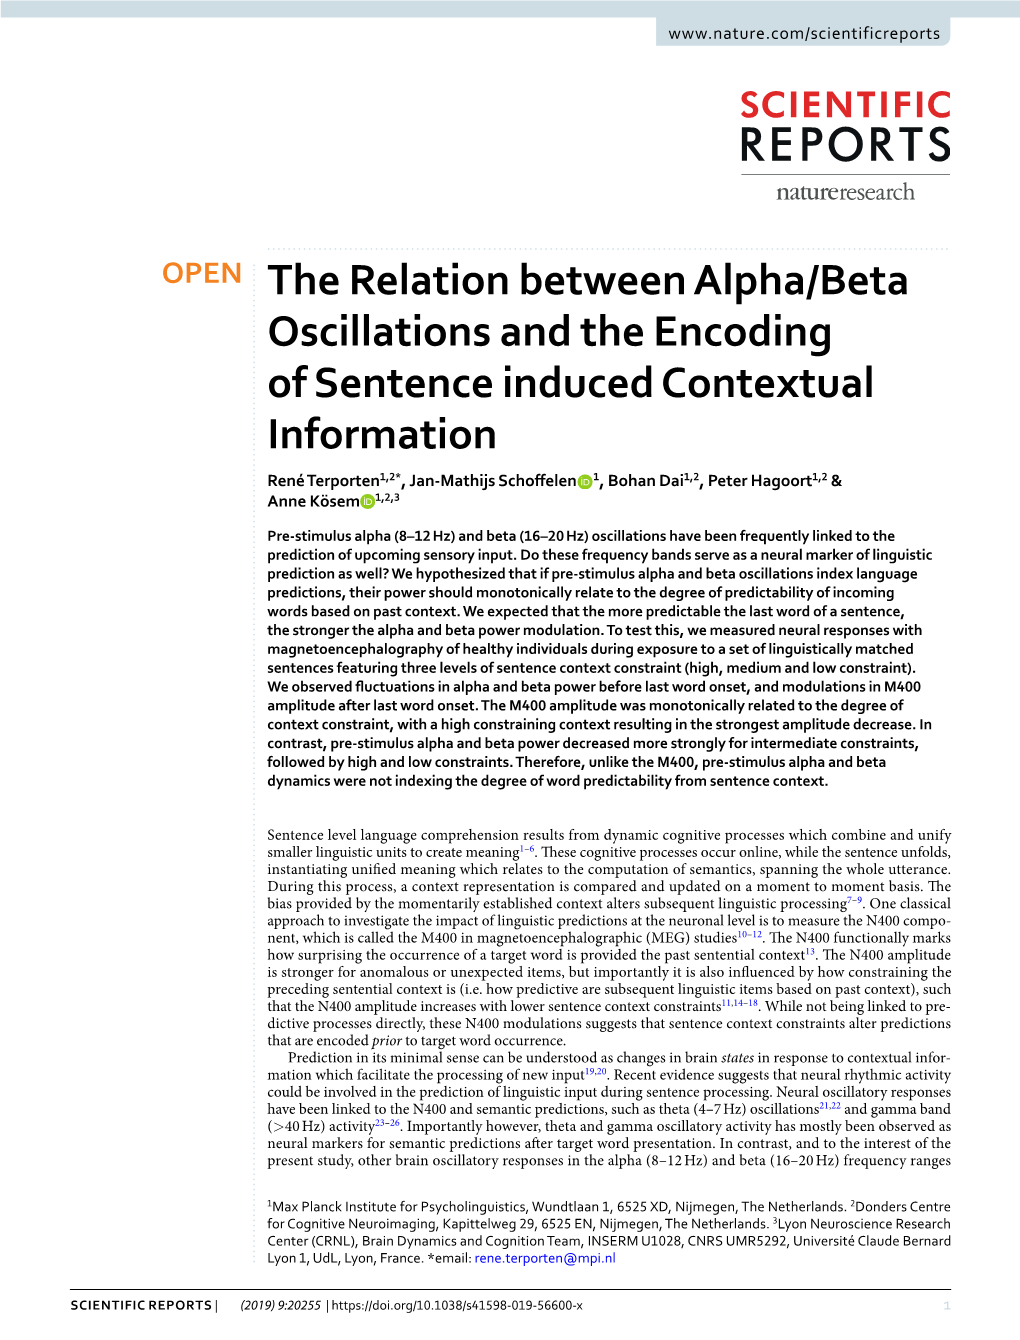 The Relation Between Alpha/Beta Oscillations and the Encoding Of